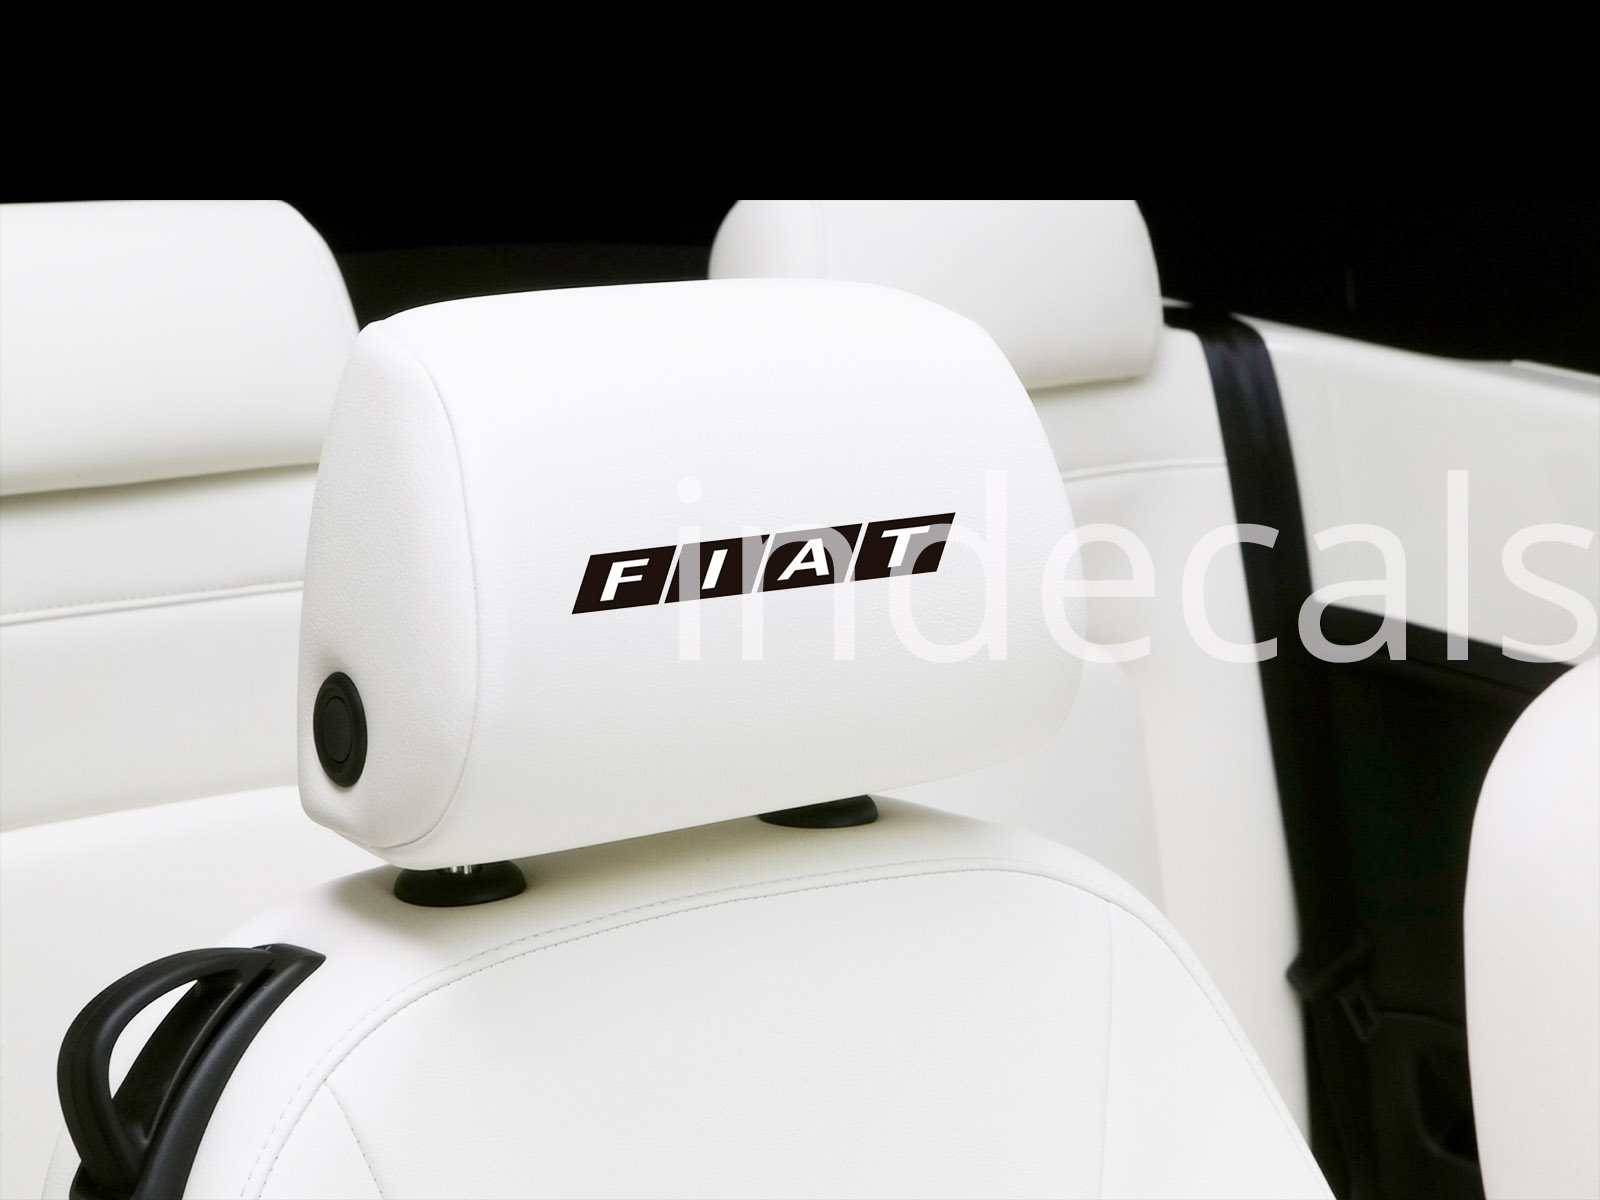 6 x Fiat Stickers for Headrests - Black